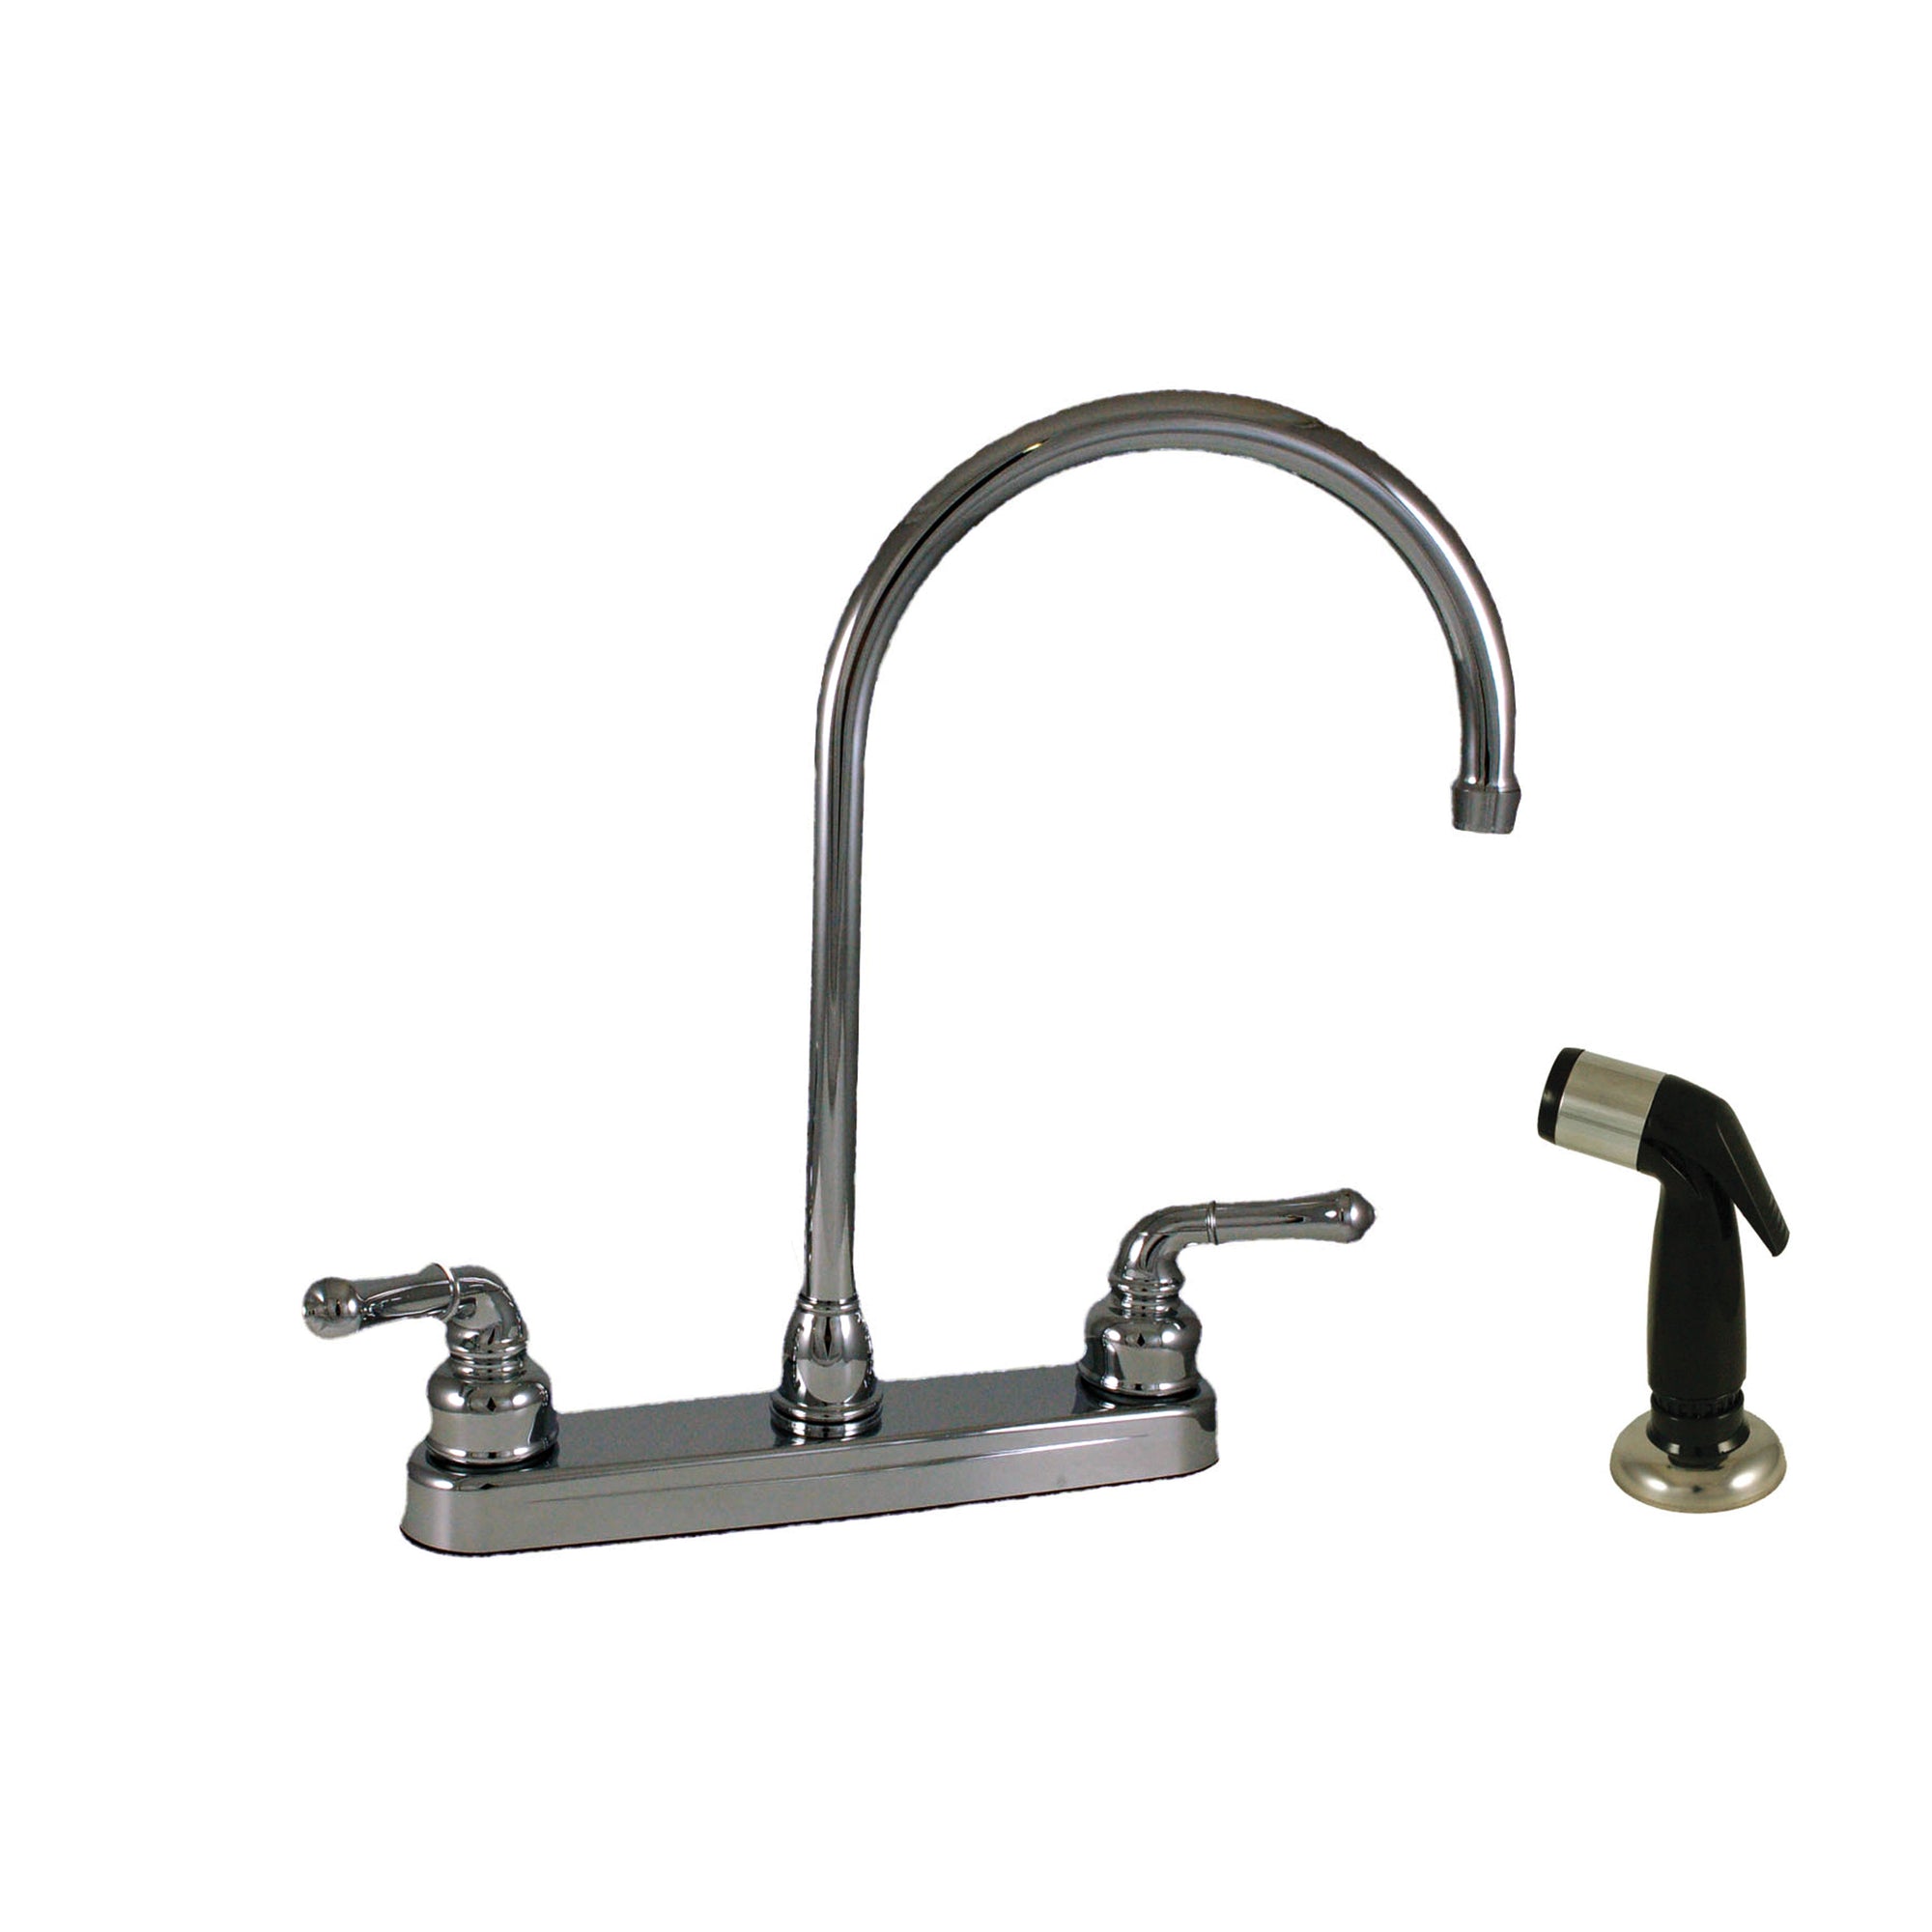 Empire Brass U-YCH801GS RV Kitchen Faucet with Large Gooseneck Spout, Teapot Handles and Sprayer -  8", Chrome